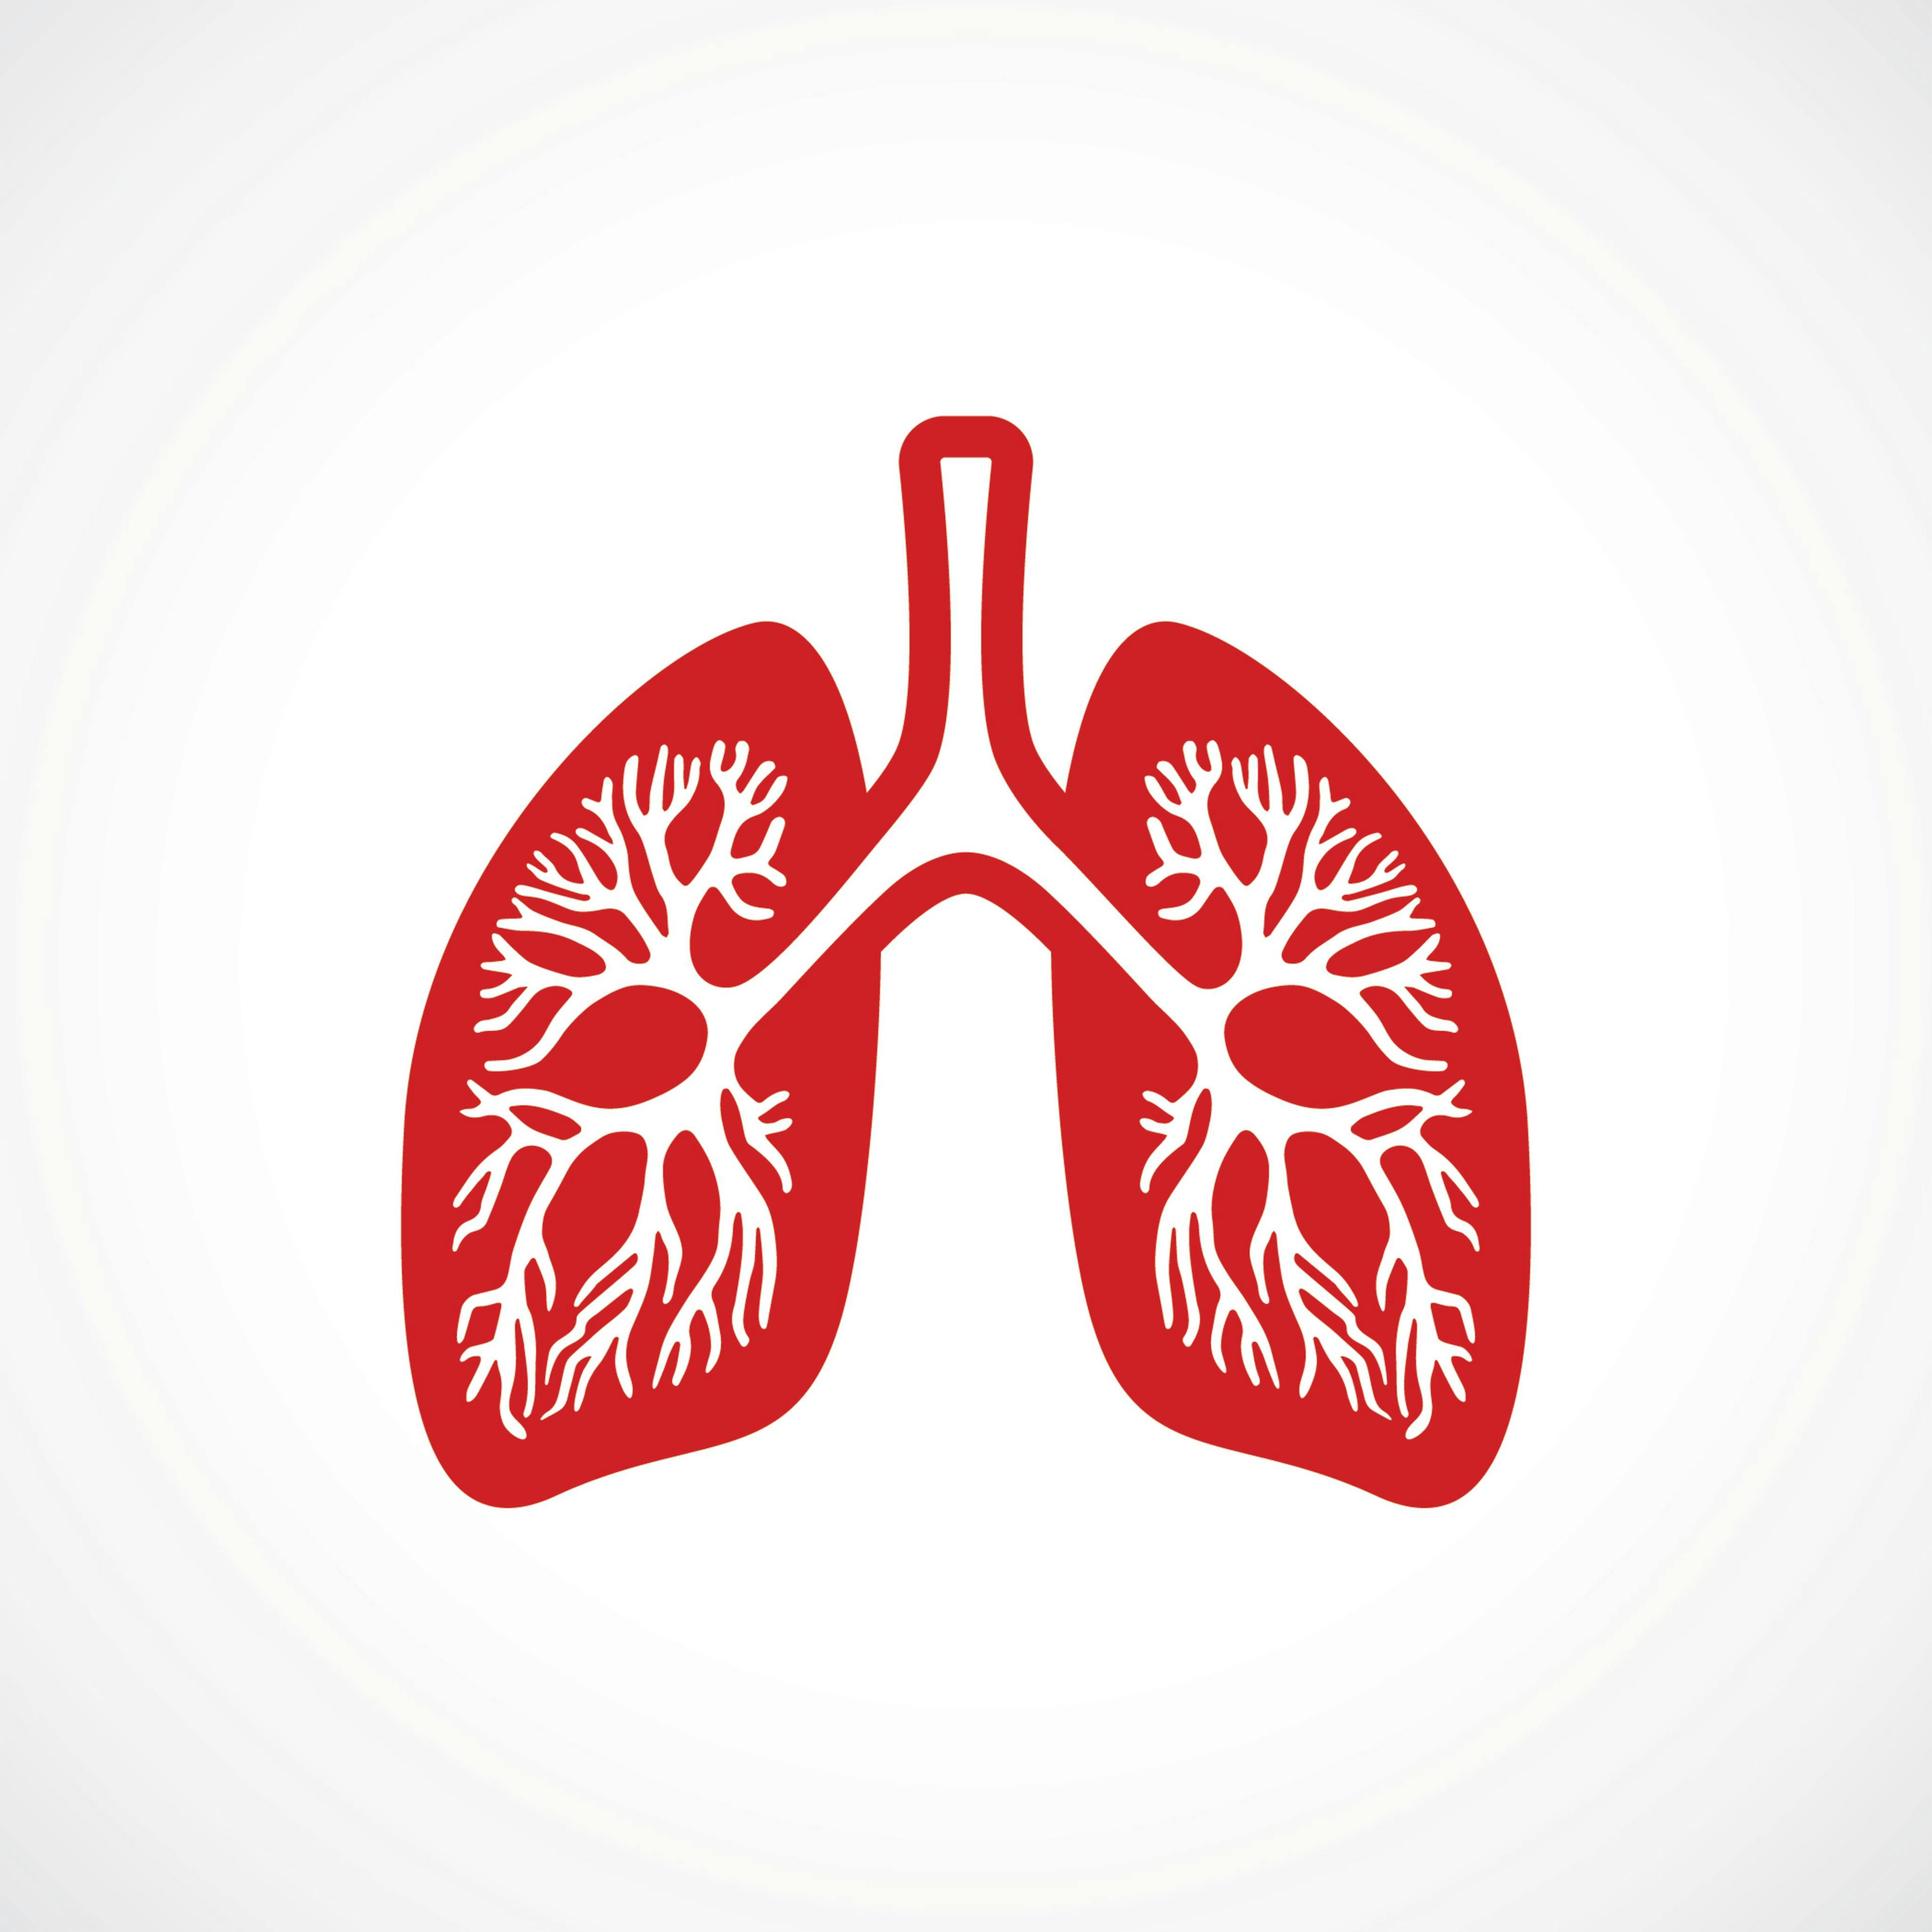 Phase 2 Trial for Sotorasib Yields Positive Results With Certain Type of NSCLC